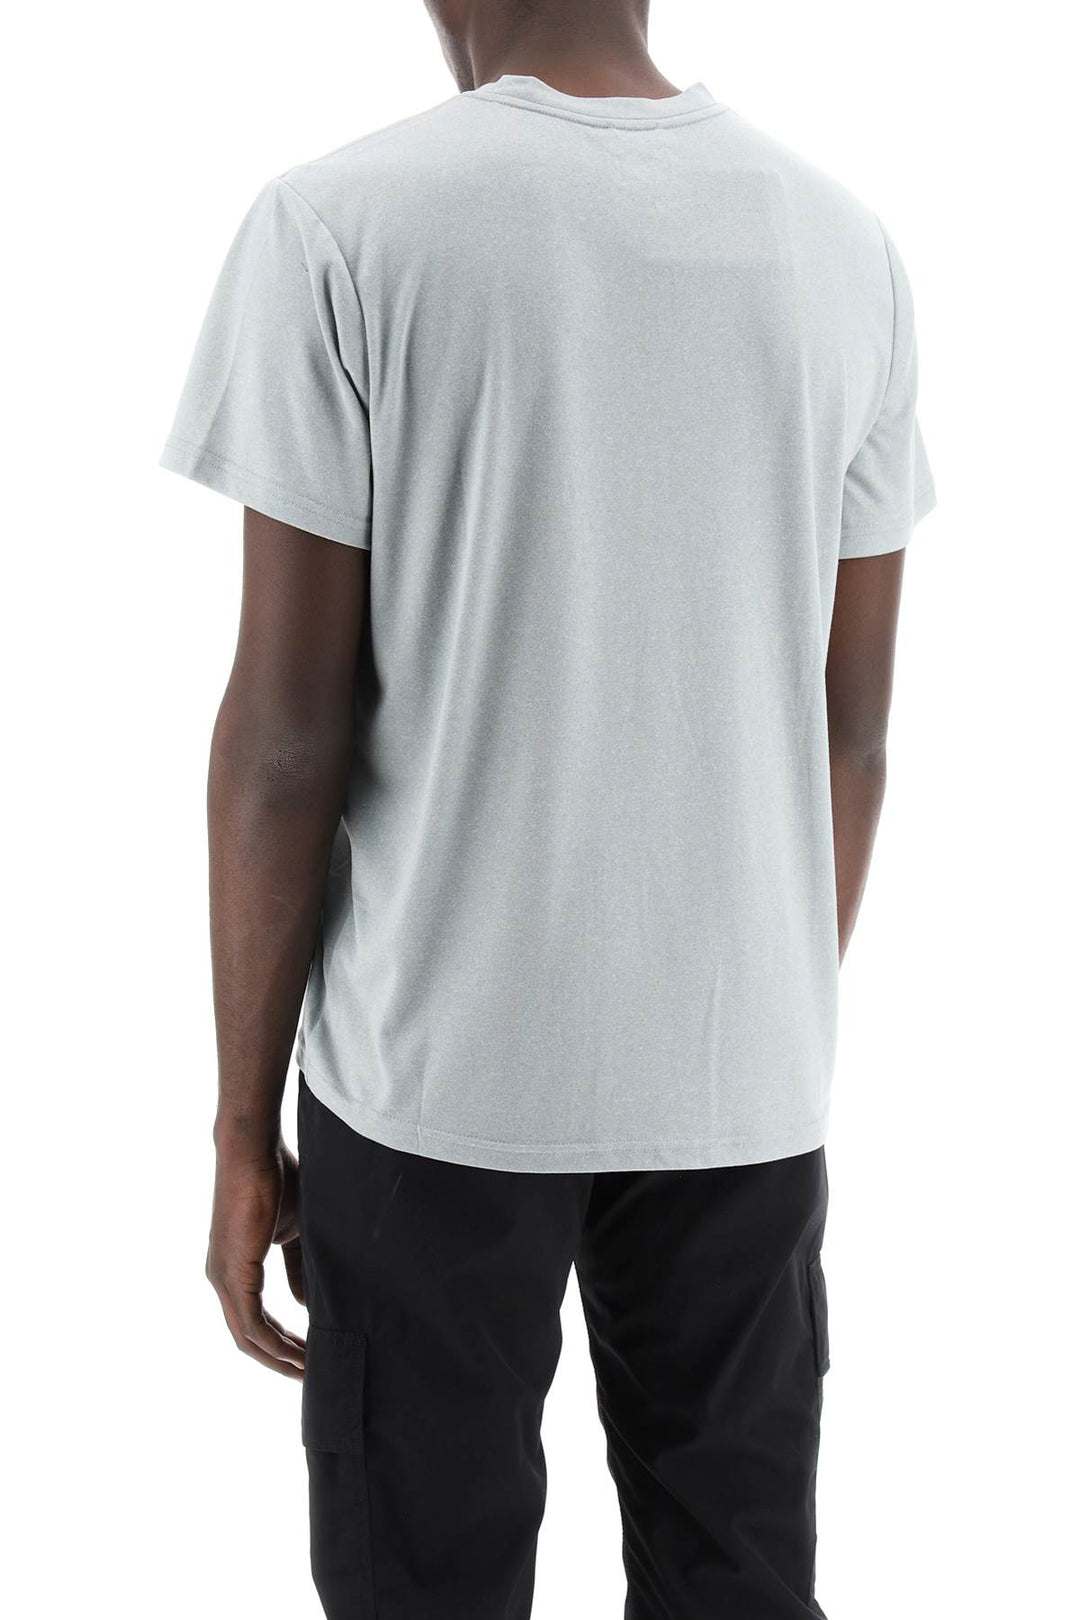 The north face reaxion t-2